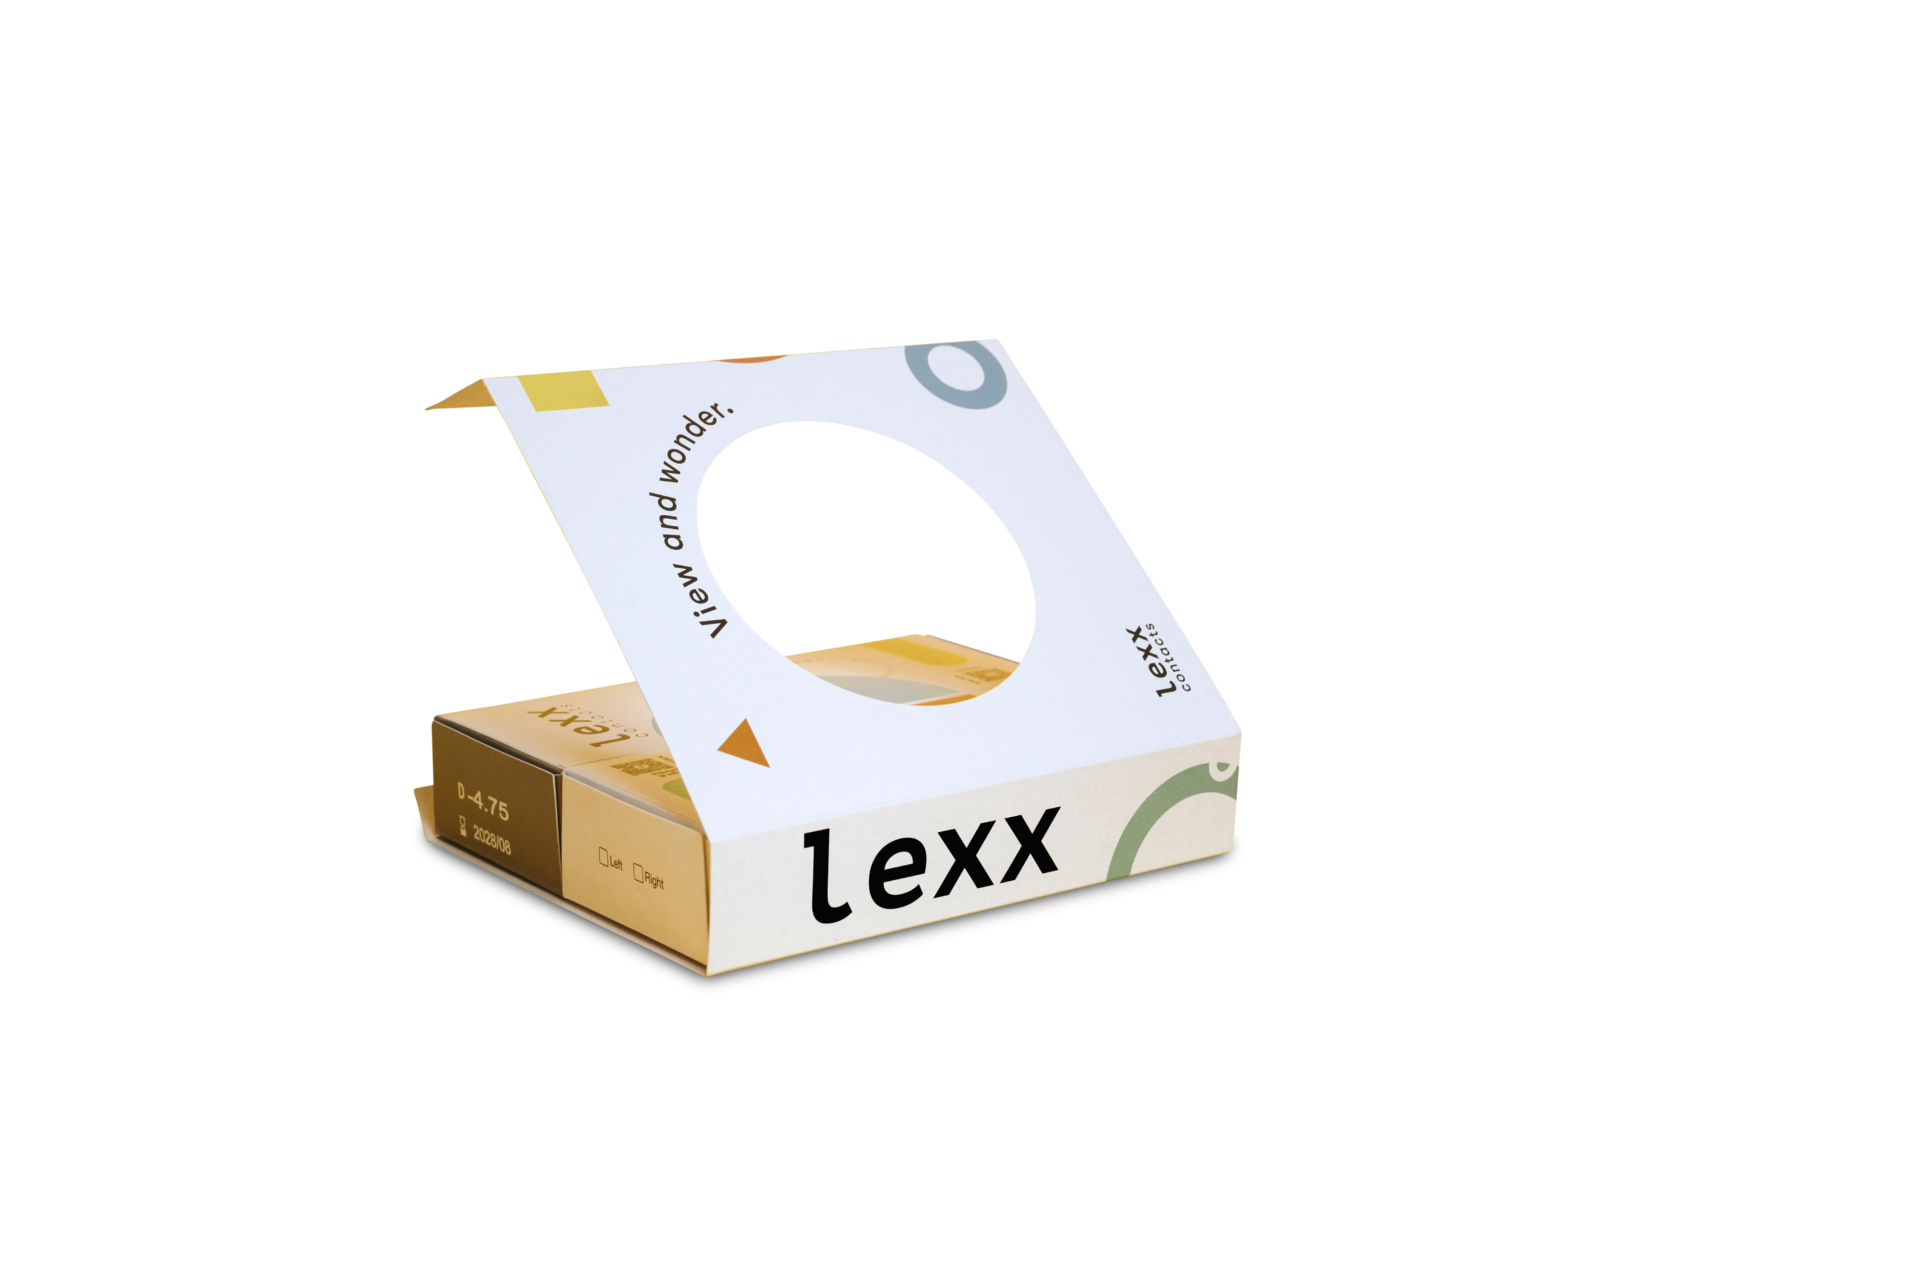 wp content uploads  0   05  eco friendly packaging contacts agri waste paper lexx lexxcontacts   c